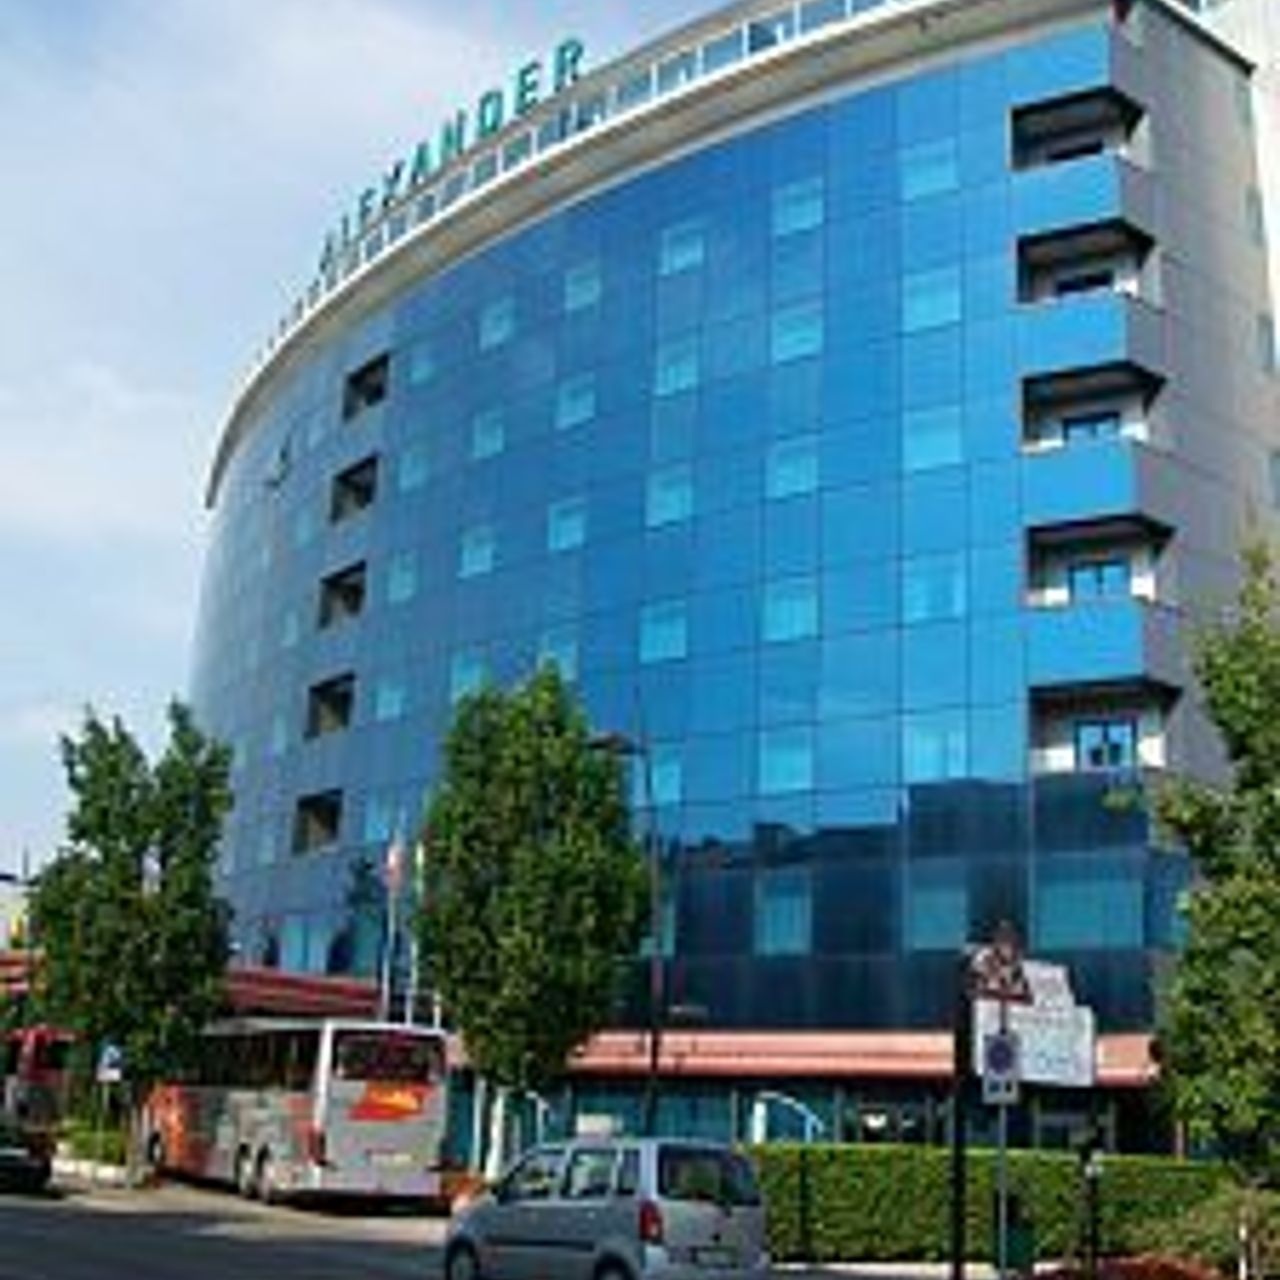 Hotel Alexander Palace - Abano Terme - Great prices at HOTEL INFO